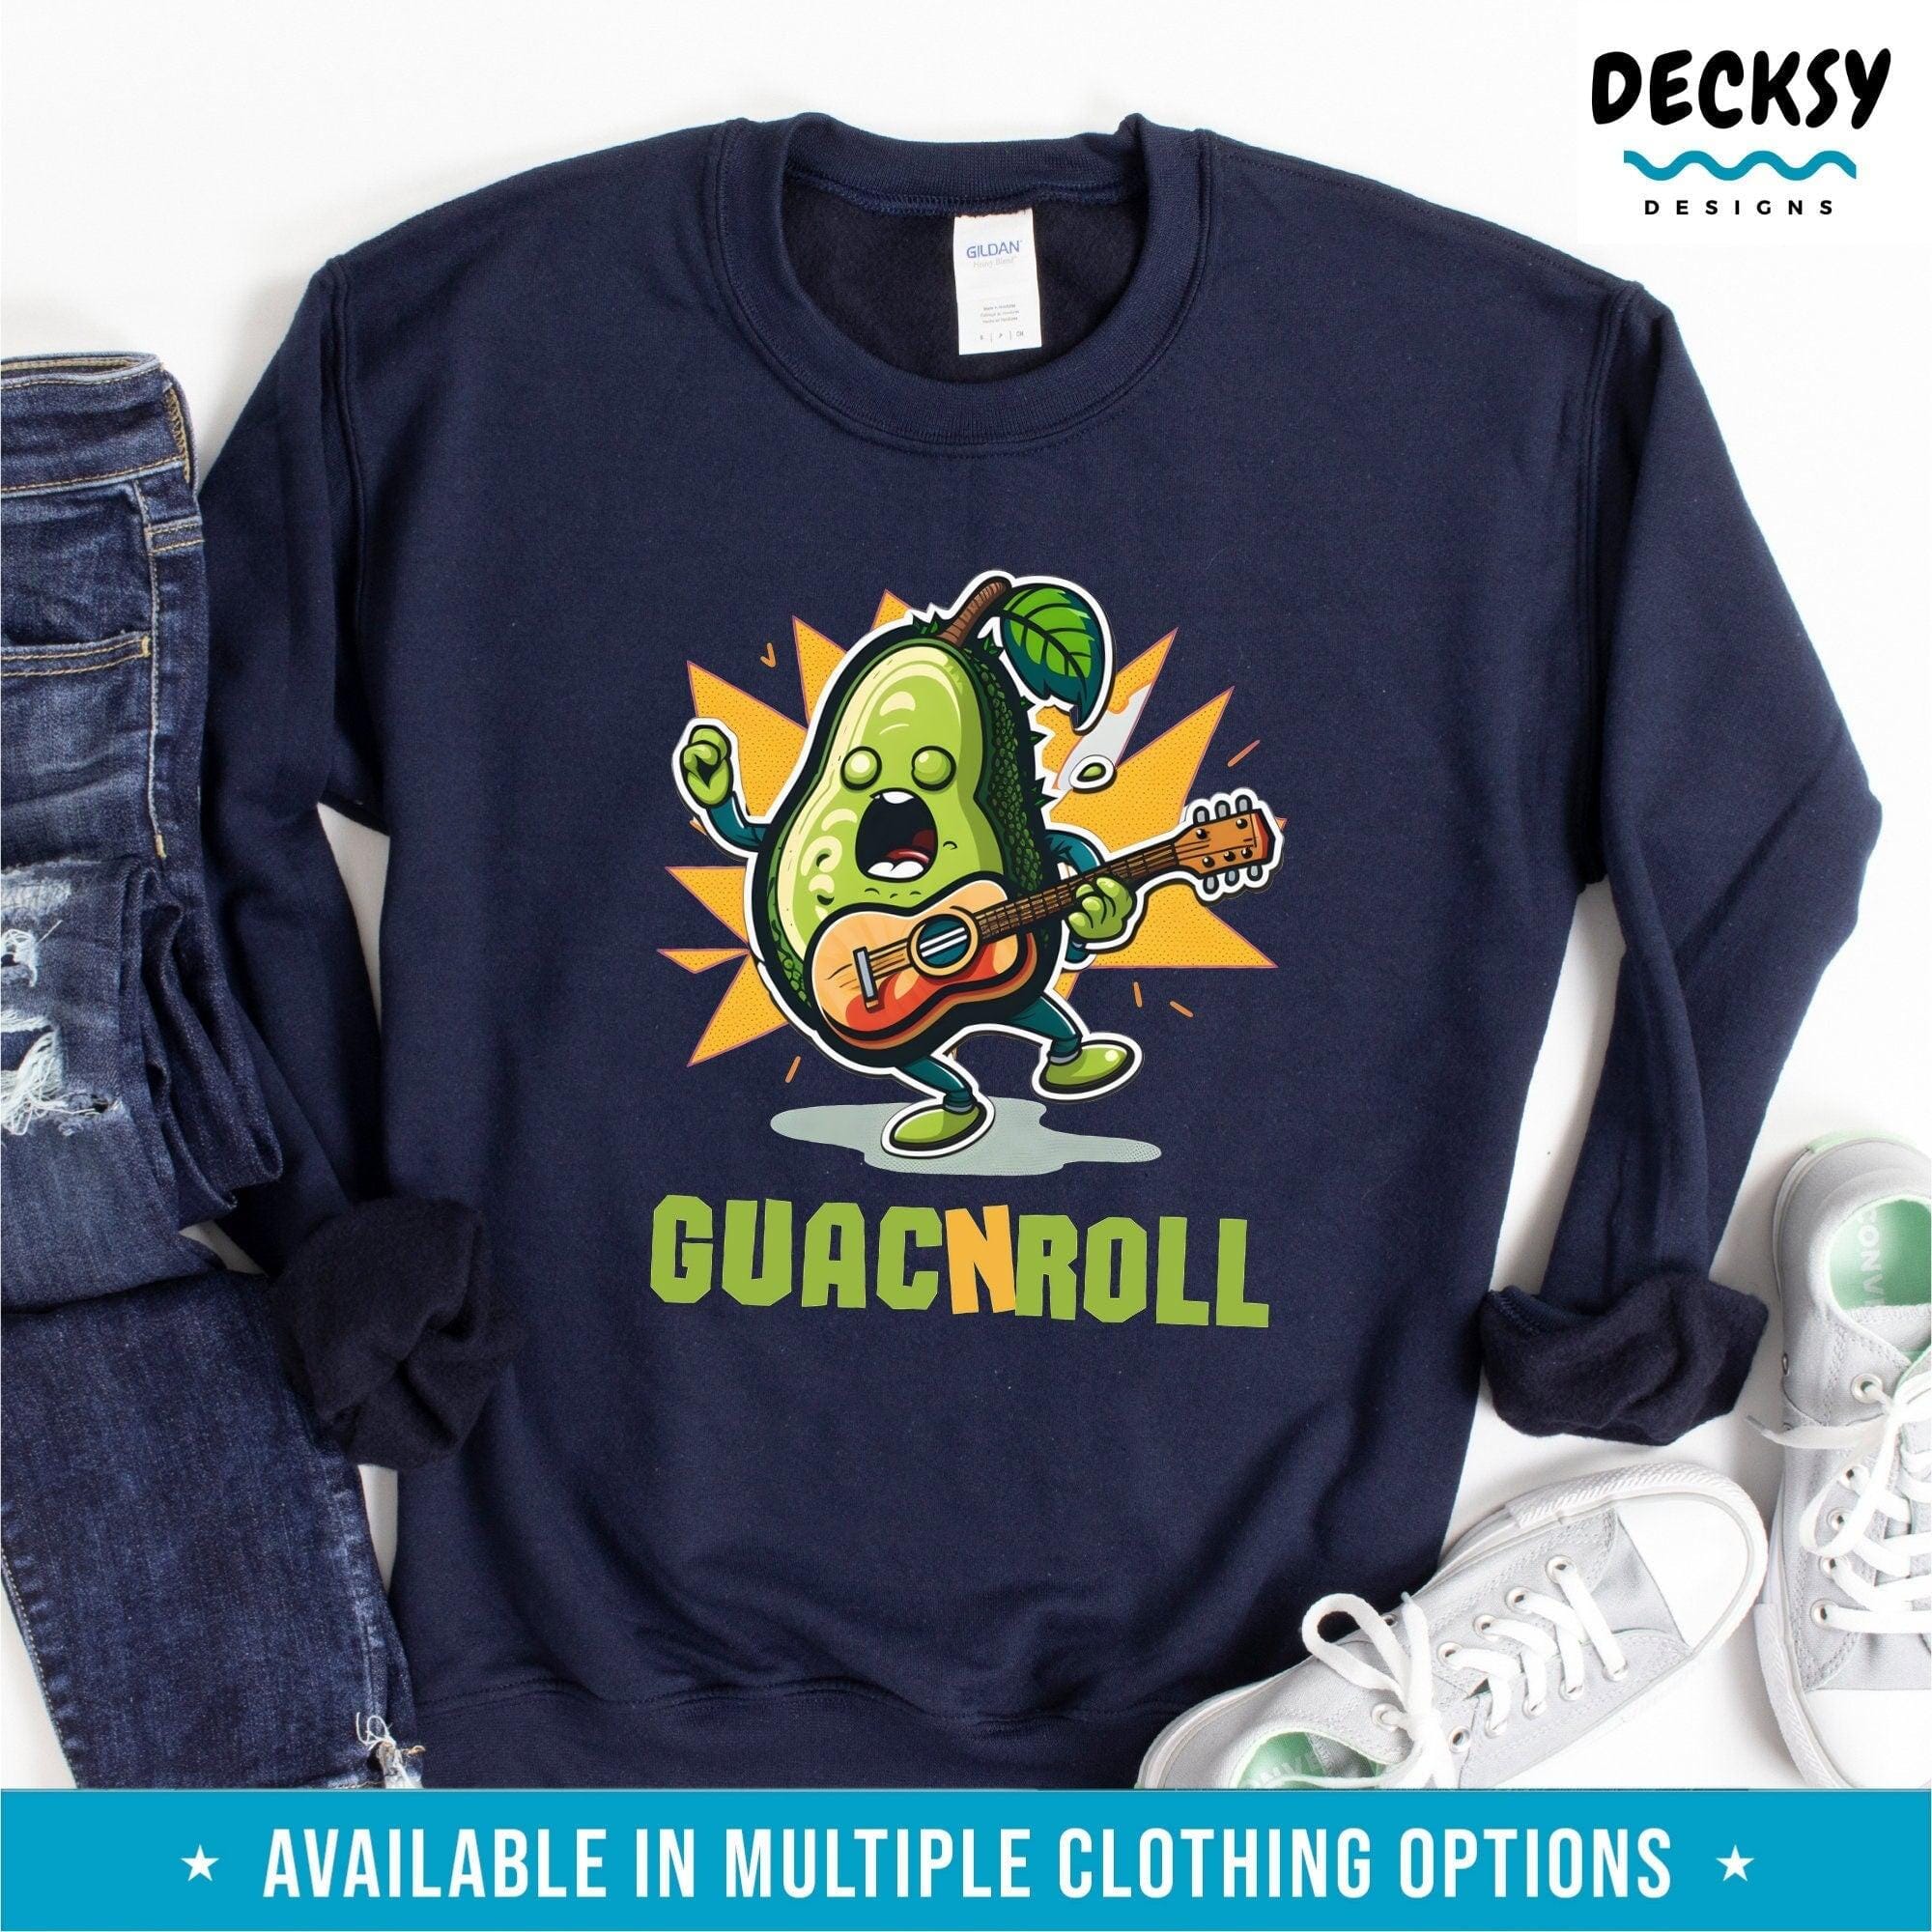 Funny Avocado Shirt, Gift for Avocado Lover-Clothing:Gender-Neutral Adult Clothing:Tops & Tees:T-shirts:Graphic Tees-DecksyDesigns